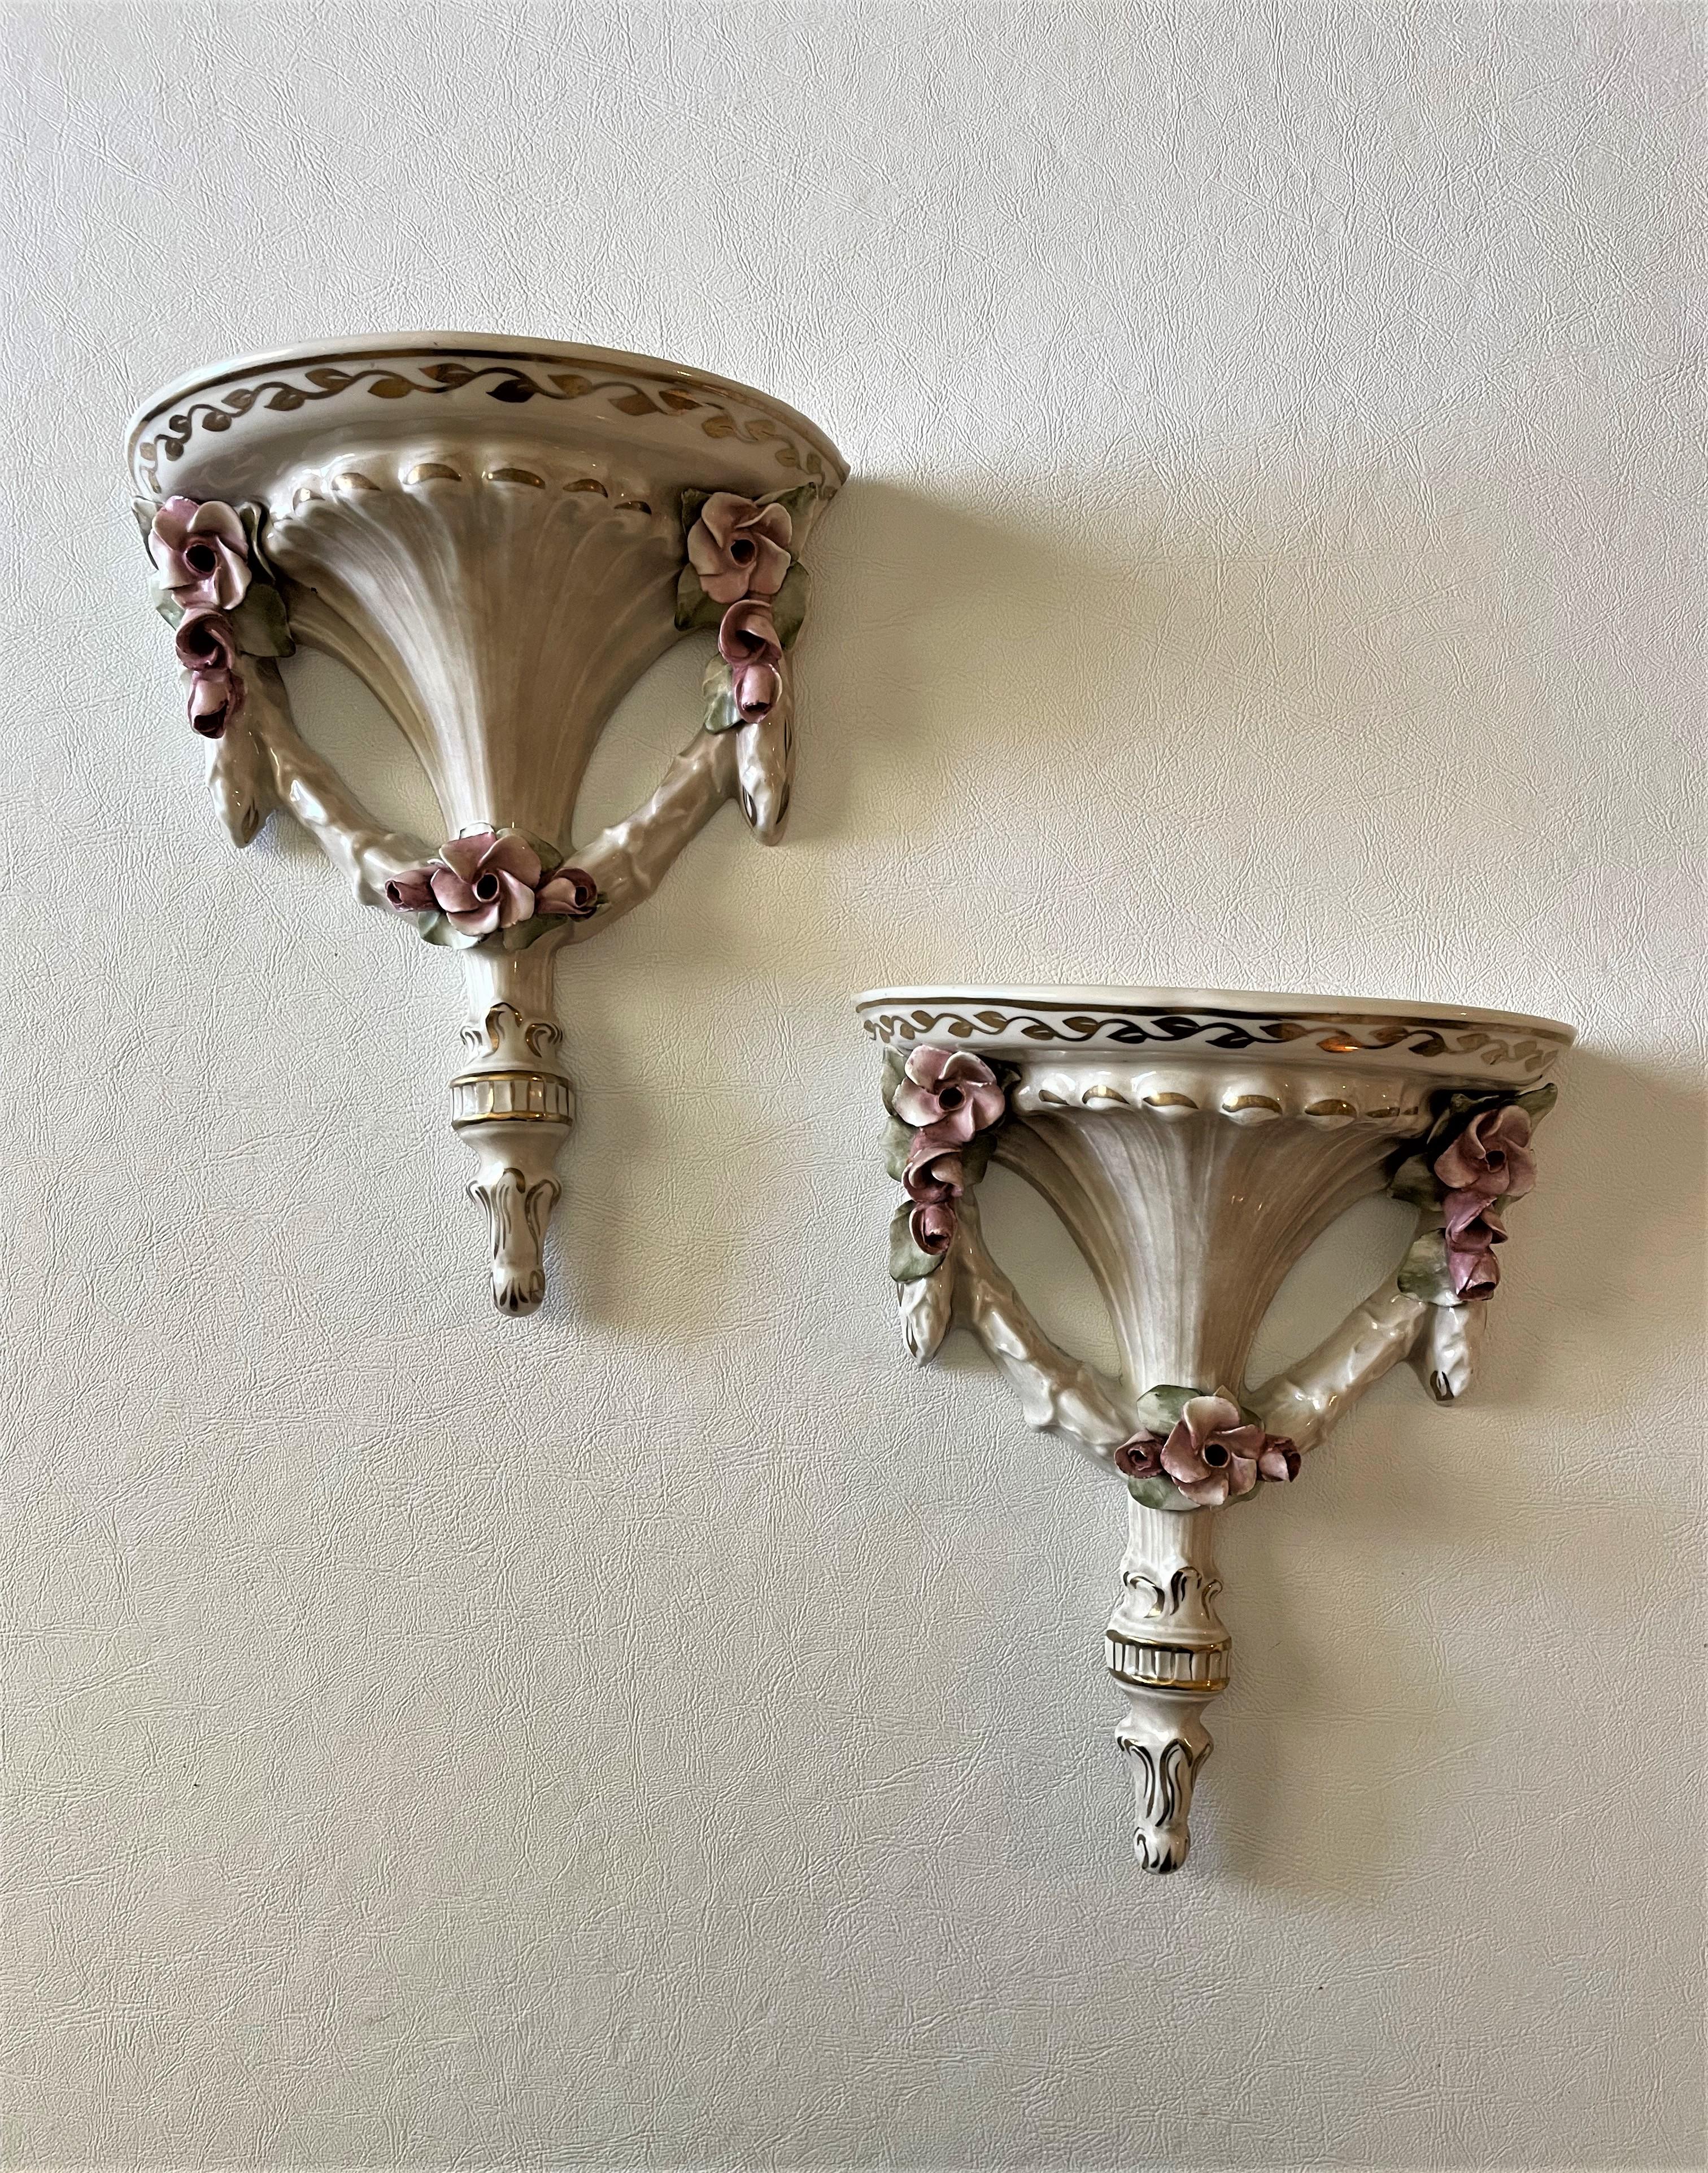 This pair of antique French decorative wall brackets dates to the 19th century. They are unusual for their mint condition and for their elegant but not 'overdone' motifs -- There is nothing Rococo about this pair of wall brackets, which is typically